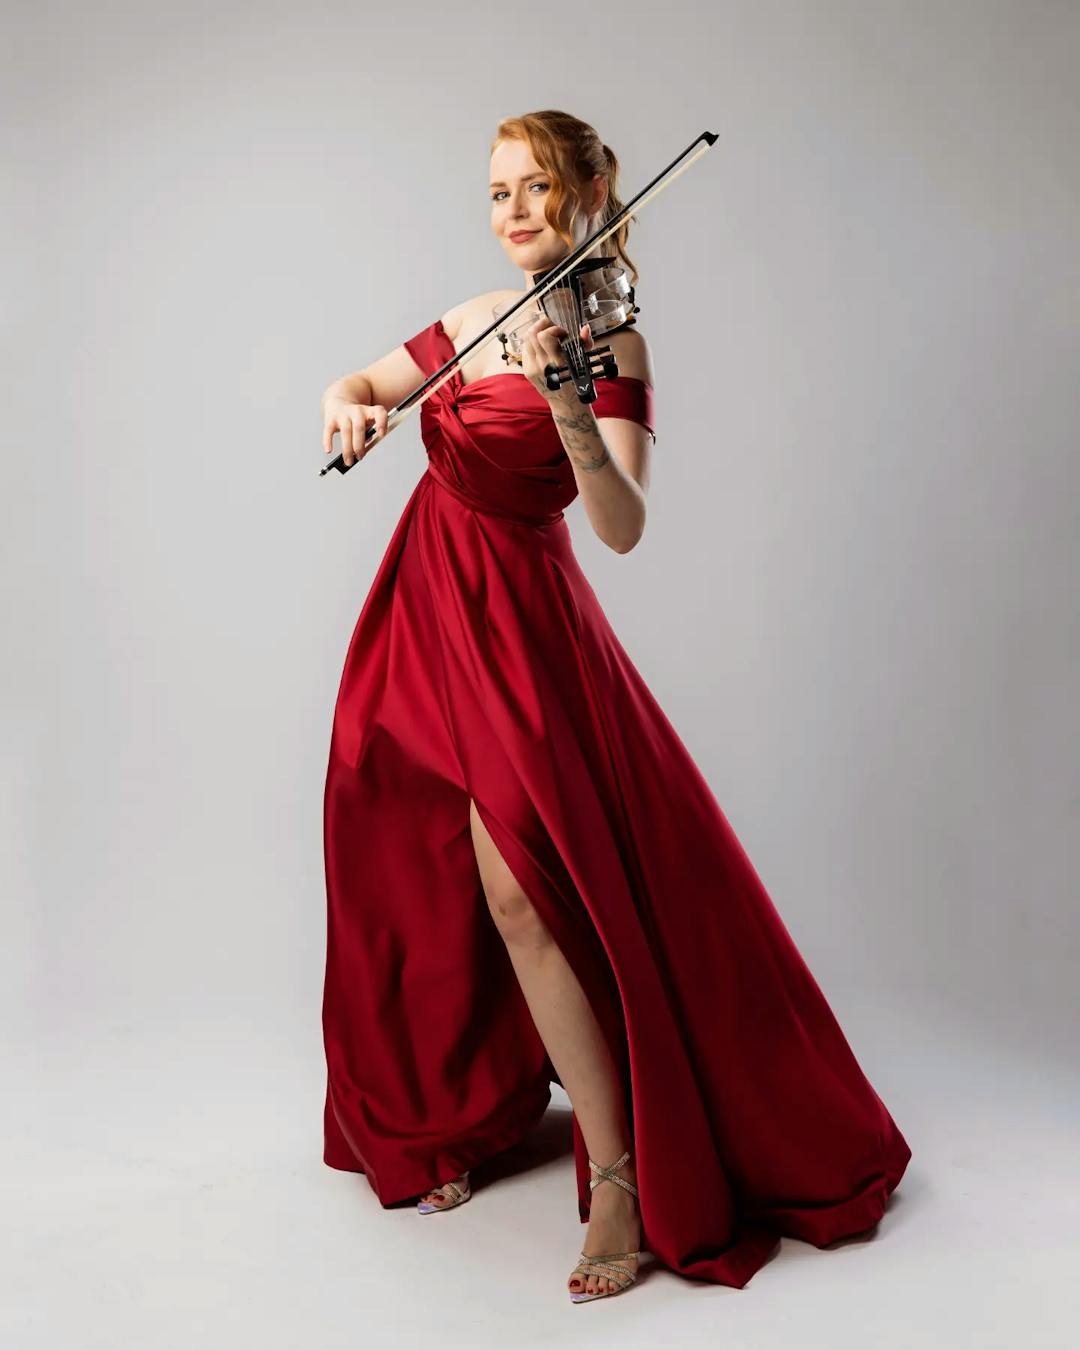 A woman in a beautiful red dress looks at the camera and pretends to plays violin